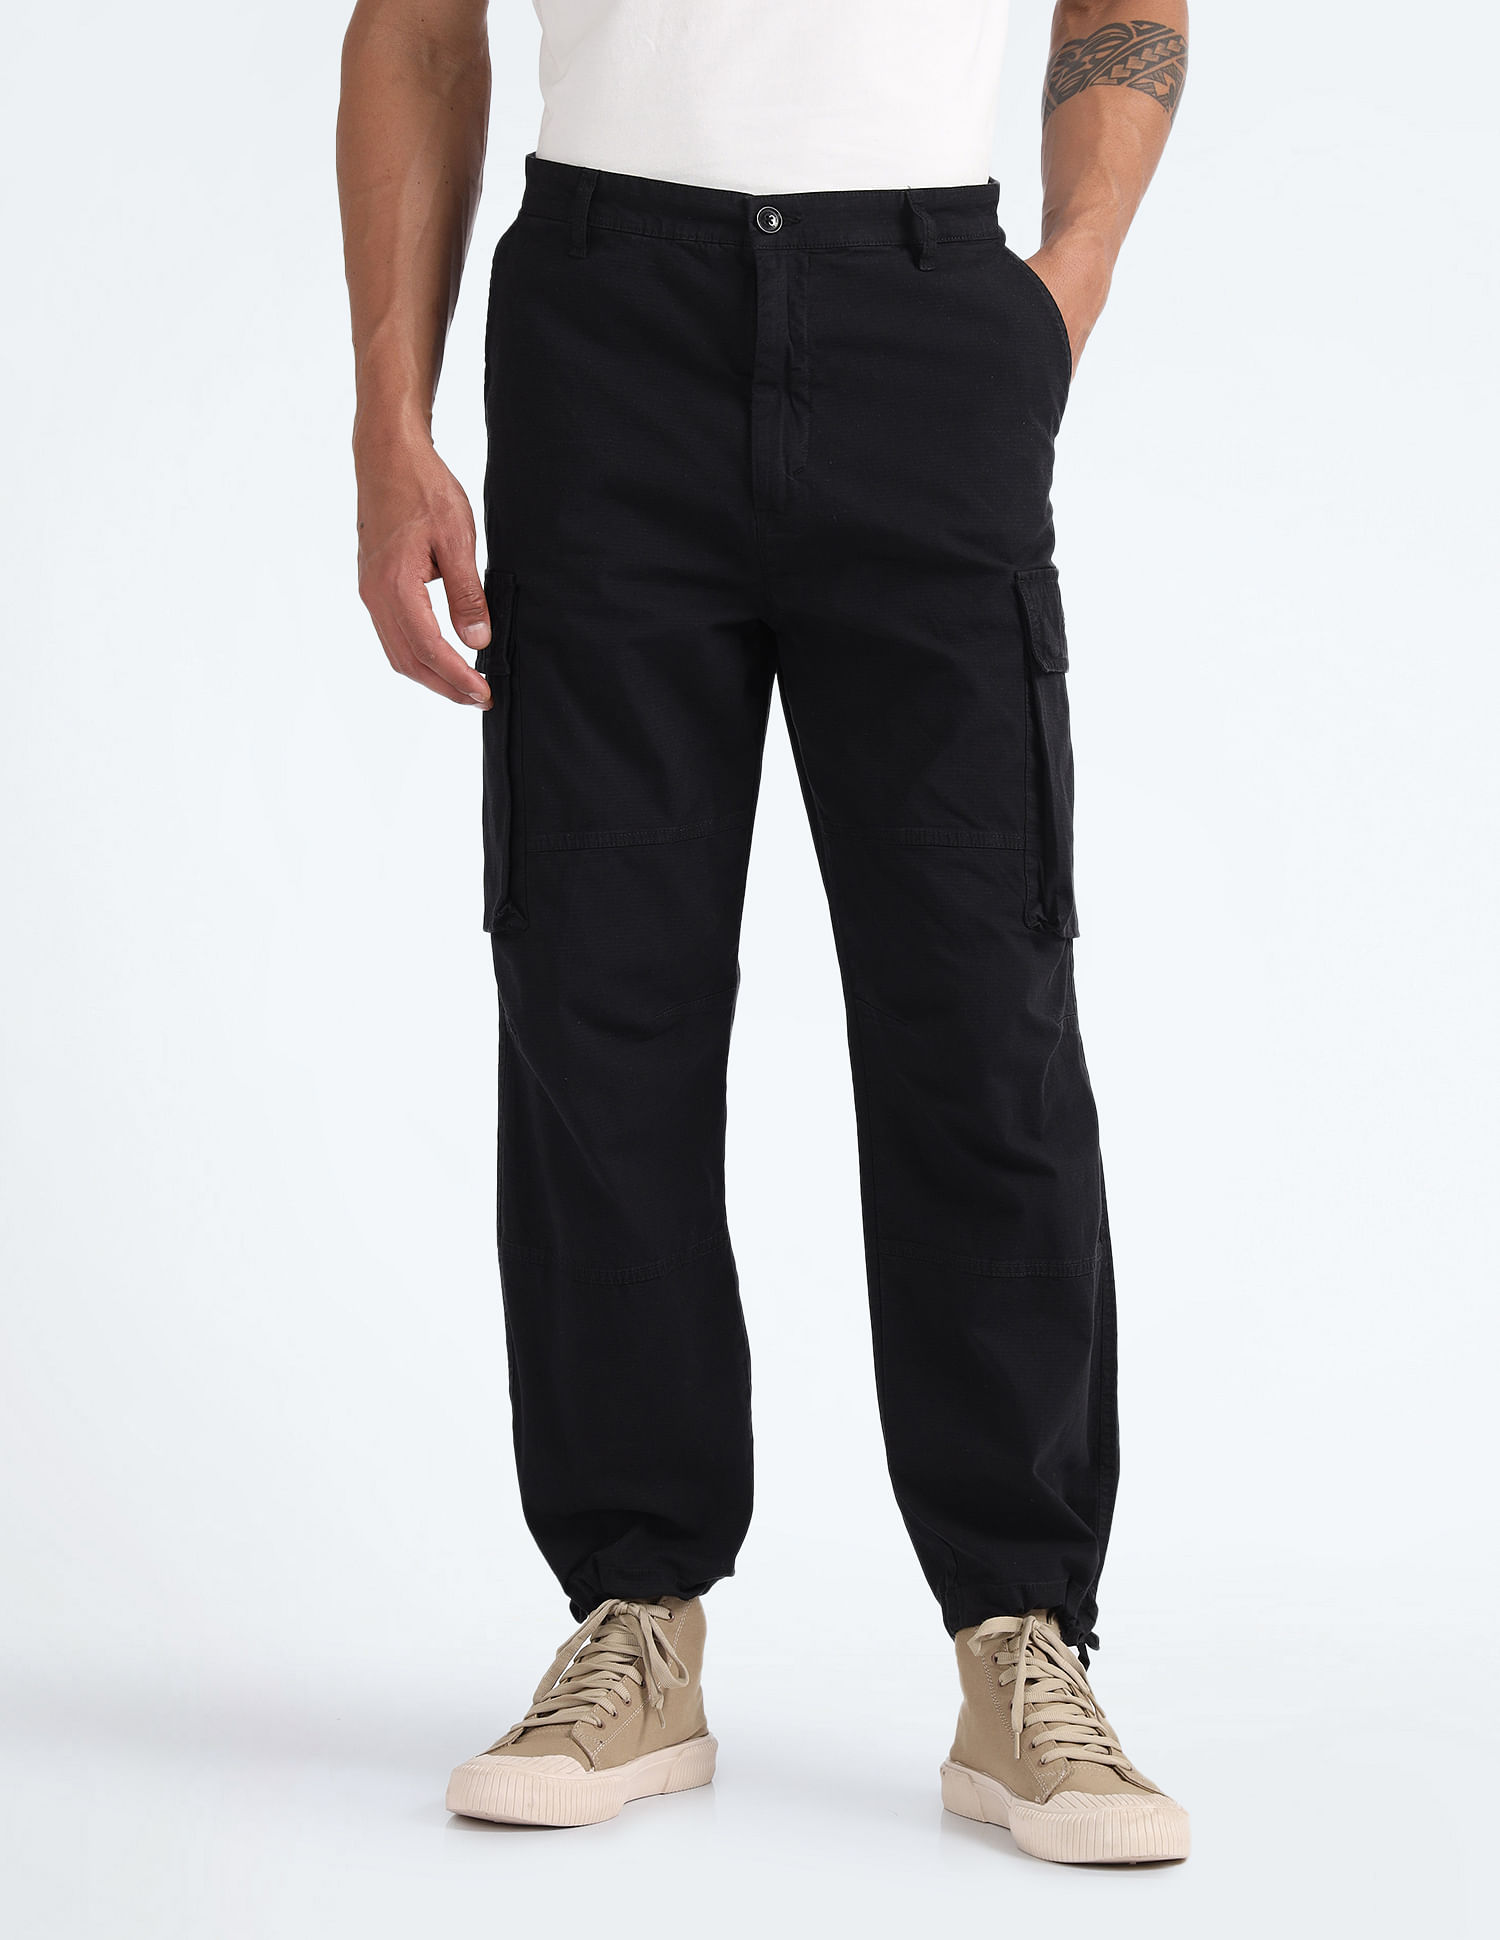 Chrome & Coral Solid Stylish Cargo Pant for Men – HAXOR